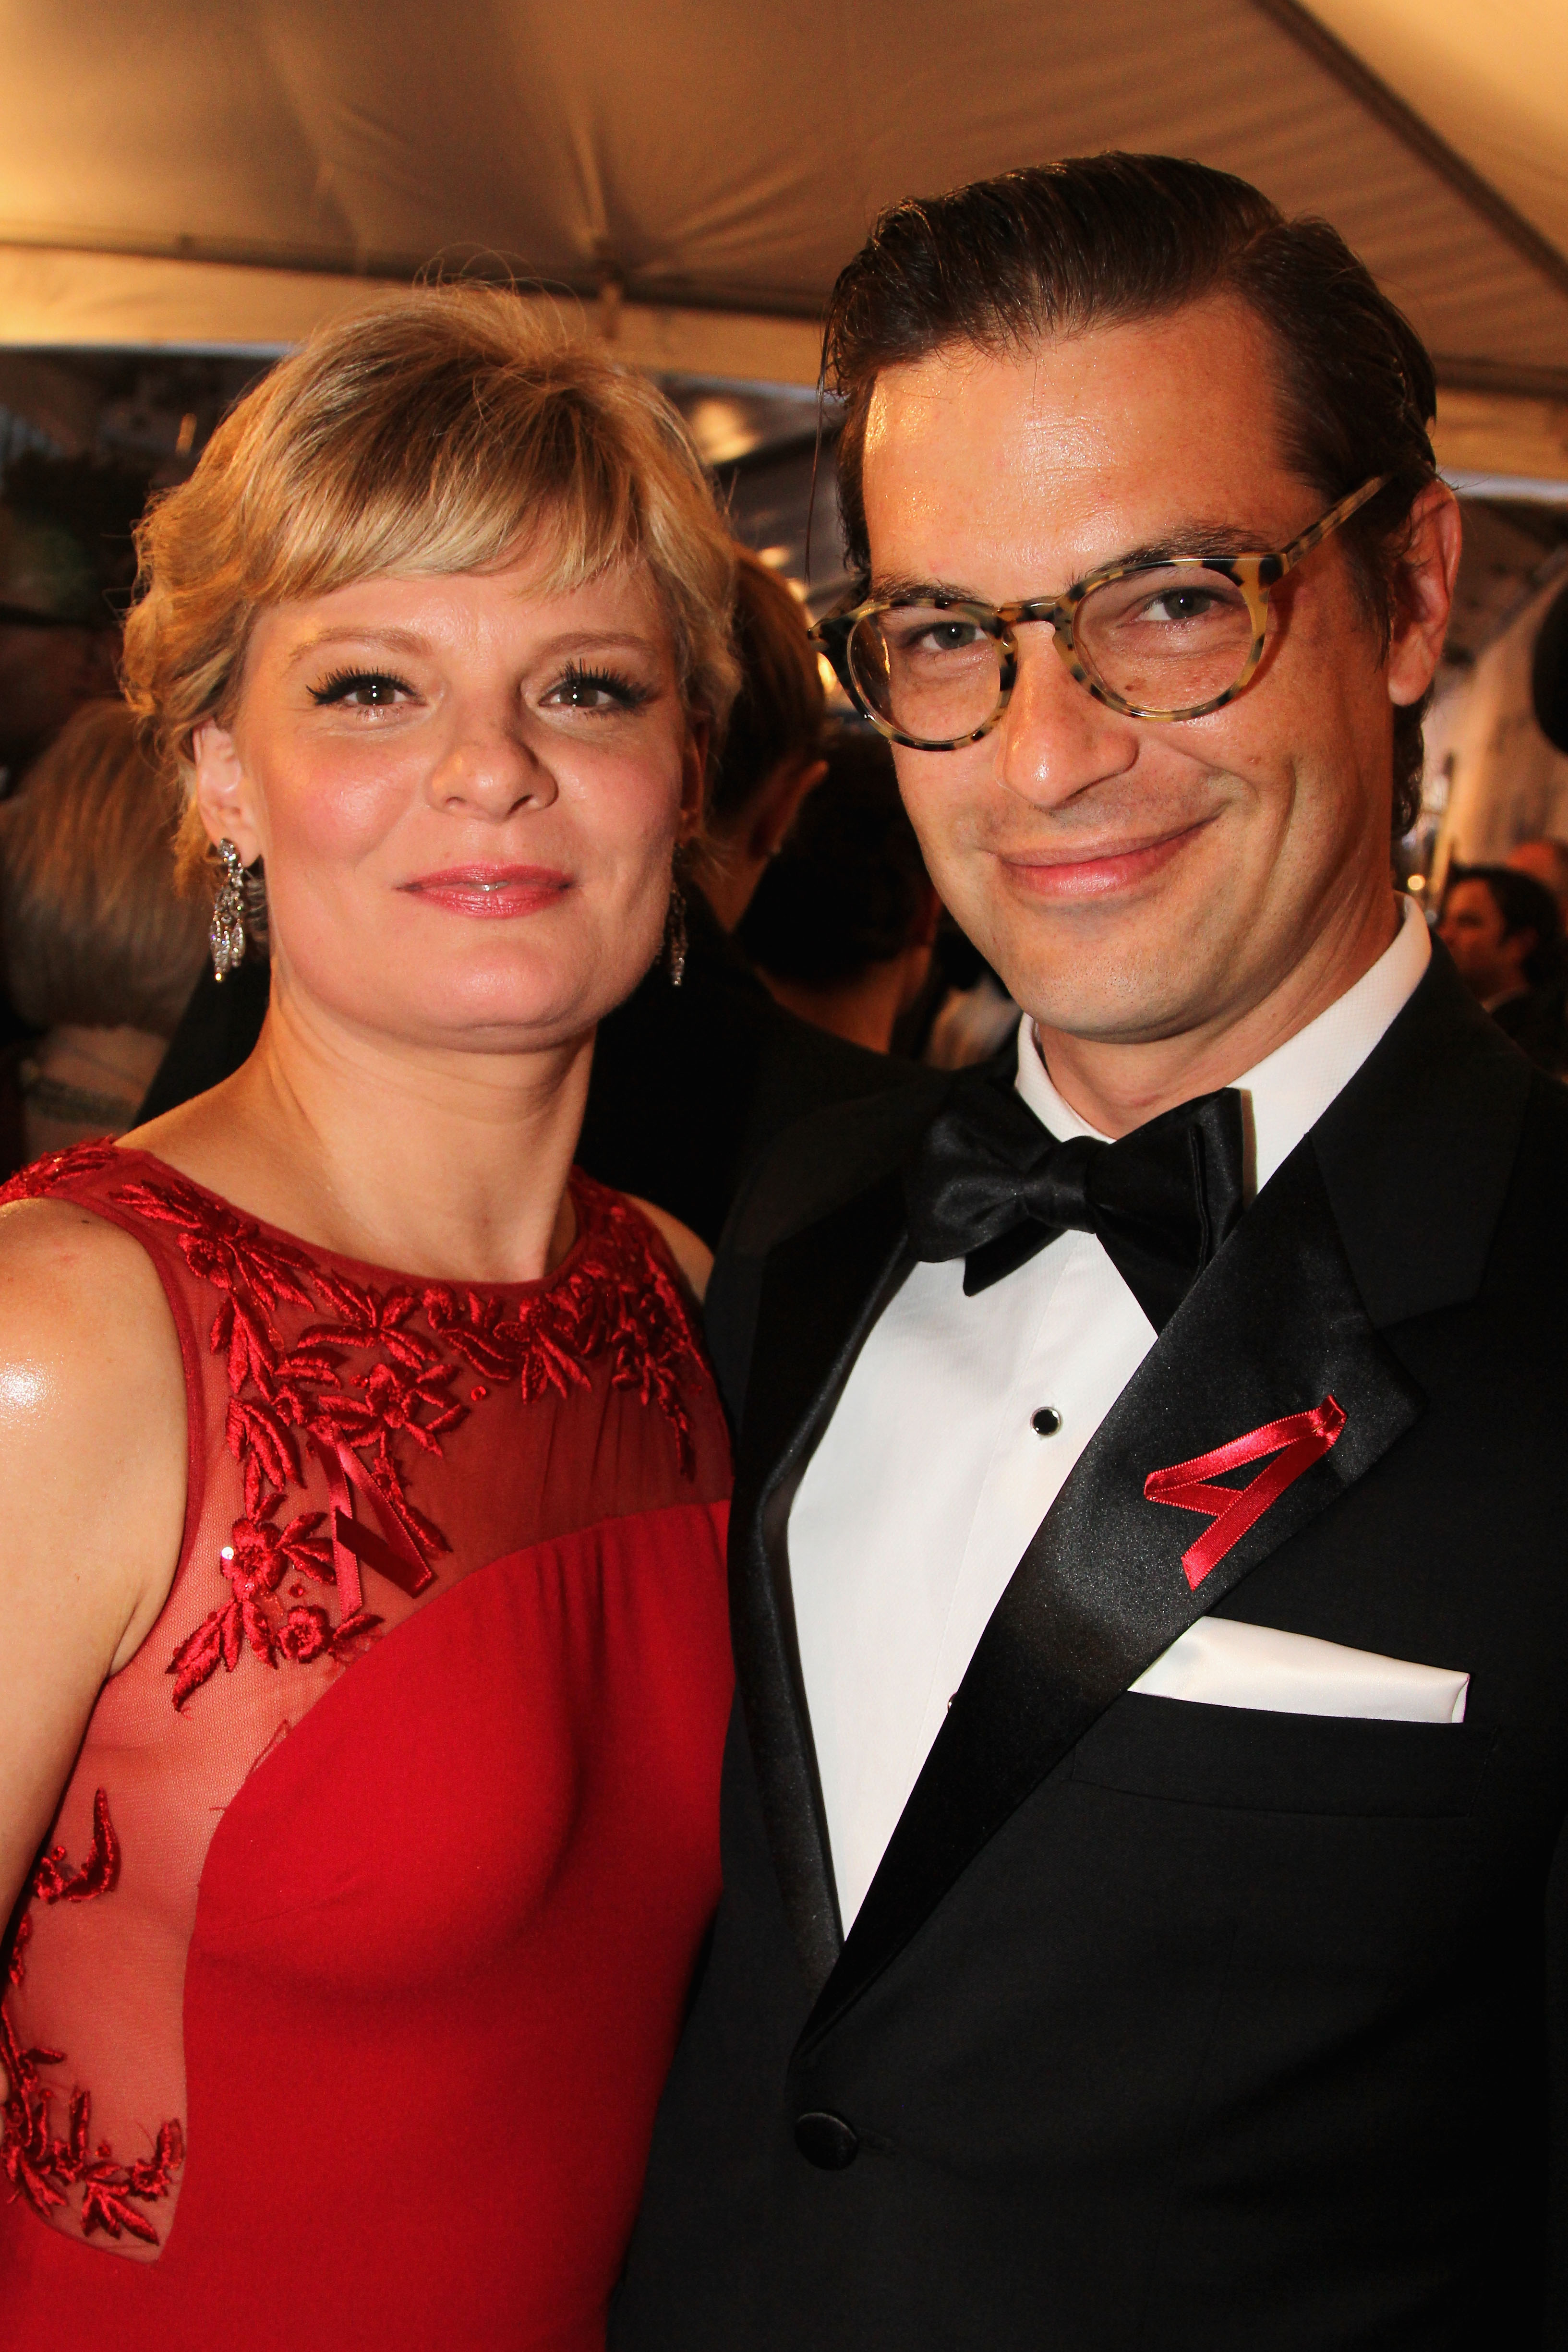 Martha Plimpton and boyfriend Tom attend The 67th Annual Tony Awards at Radio City Music Hall on June 9, 2013, in New York City. | Source: Getty Images